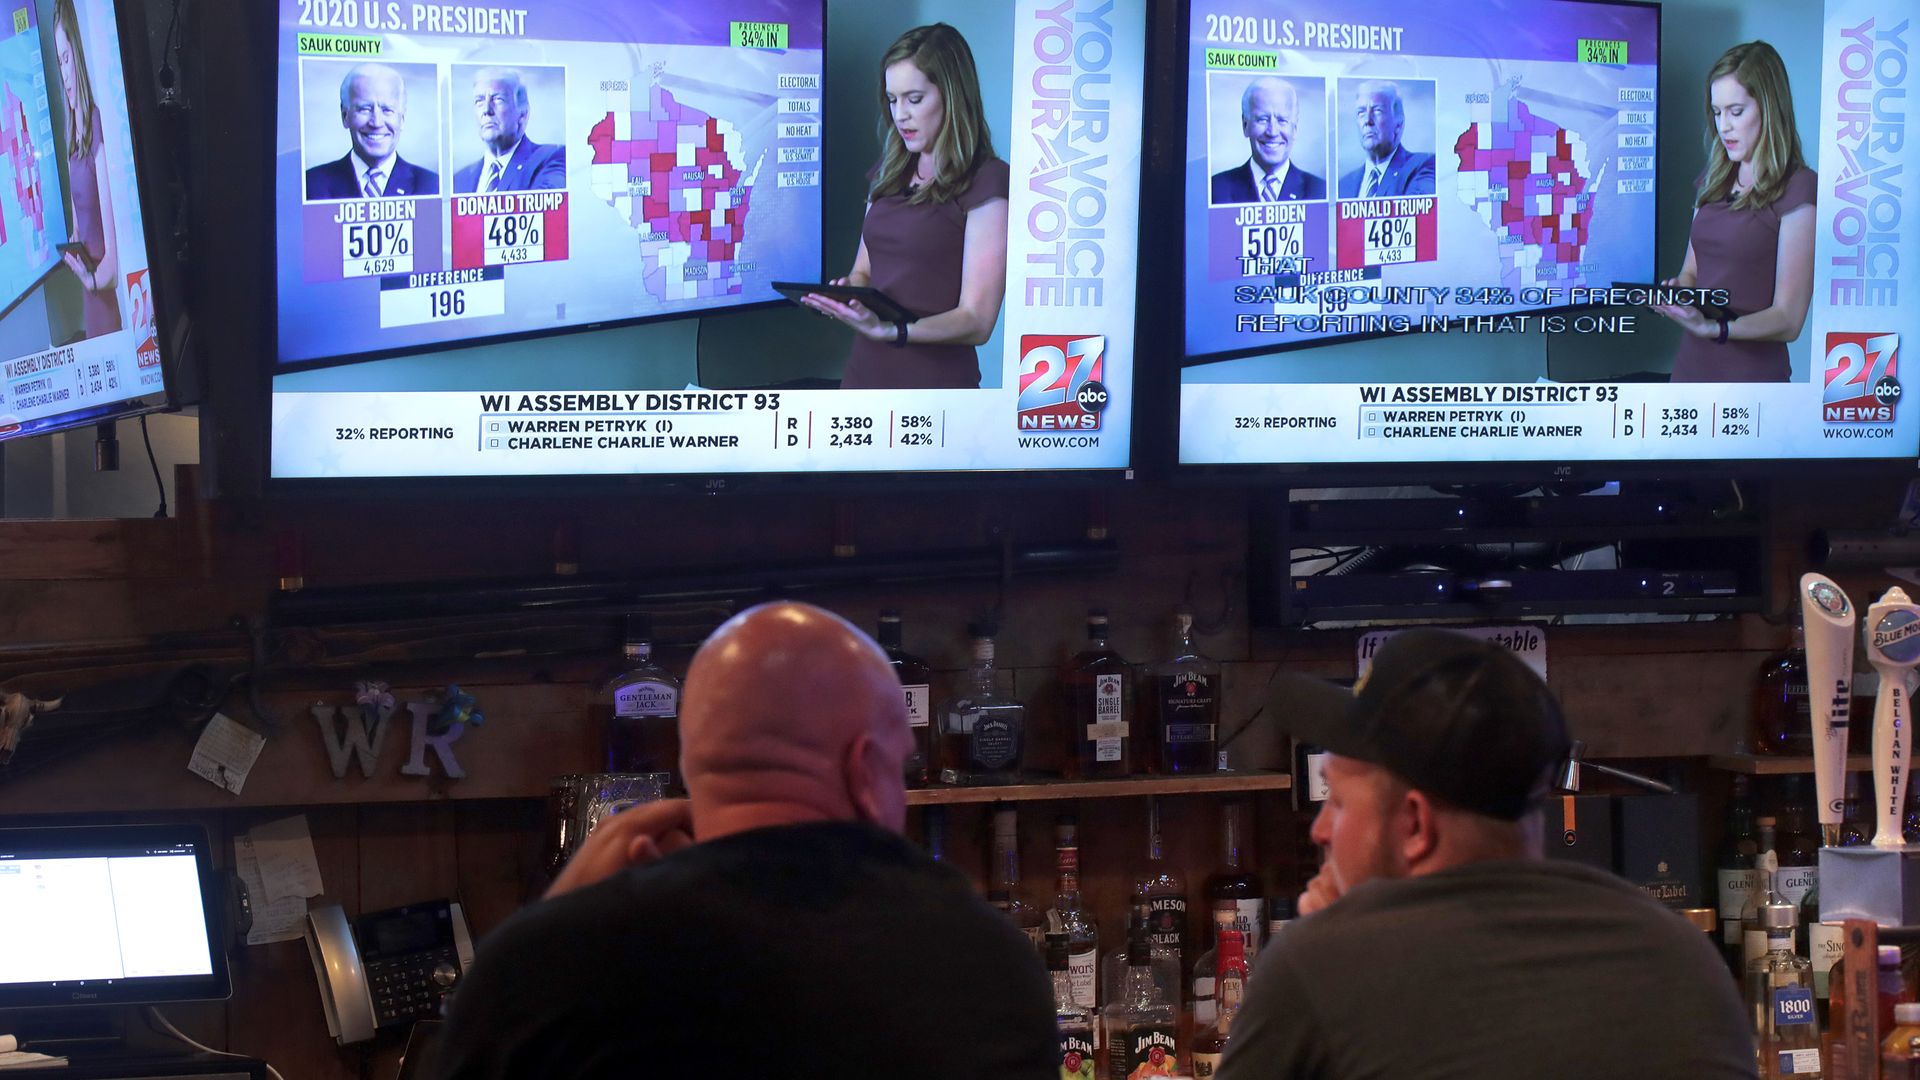 Two men sit at a bar in front of TV screens showing an electoral map of the United States